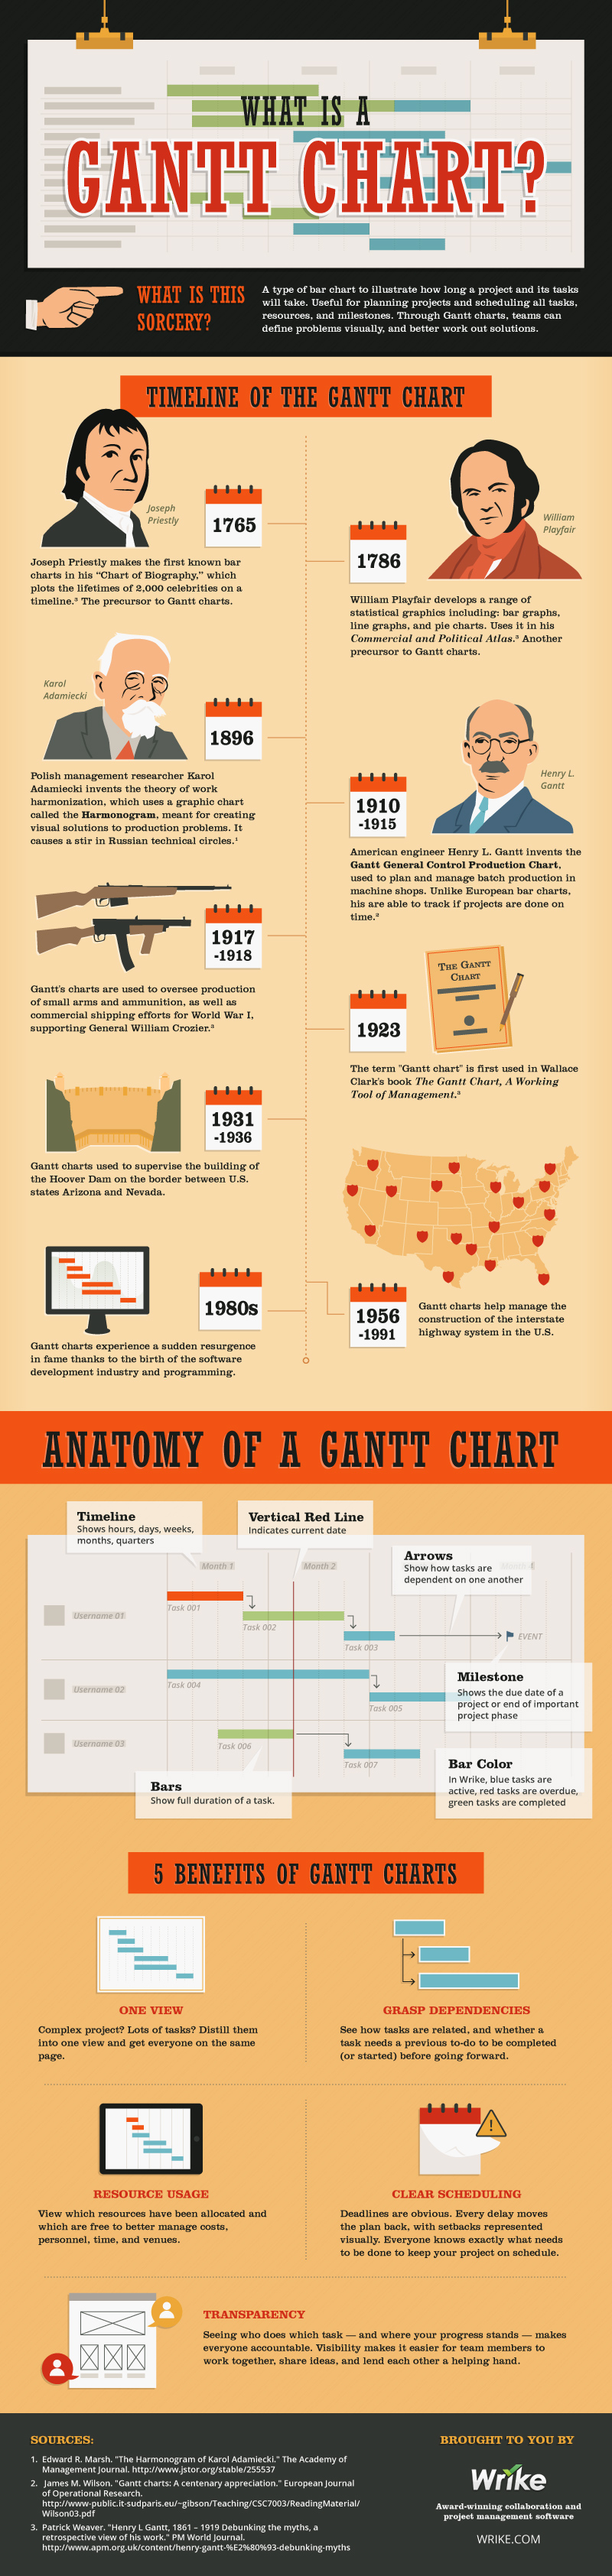 What is a Gantt Chart? Why should you use a Gantt Chart?